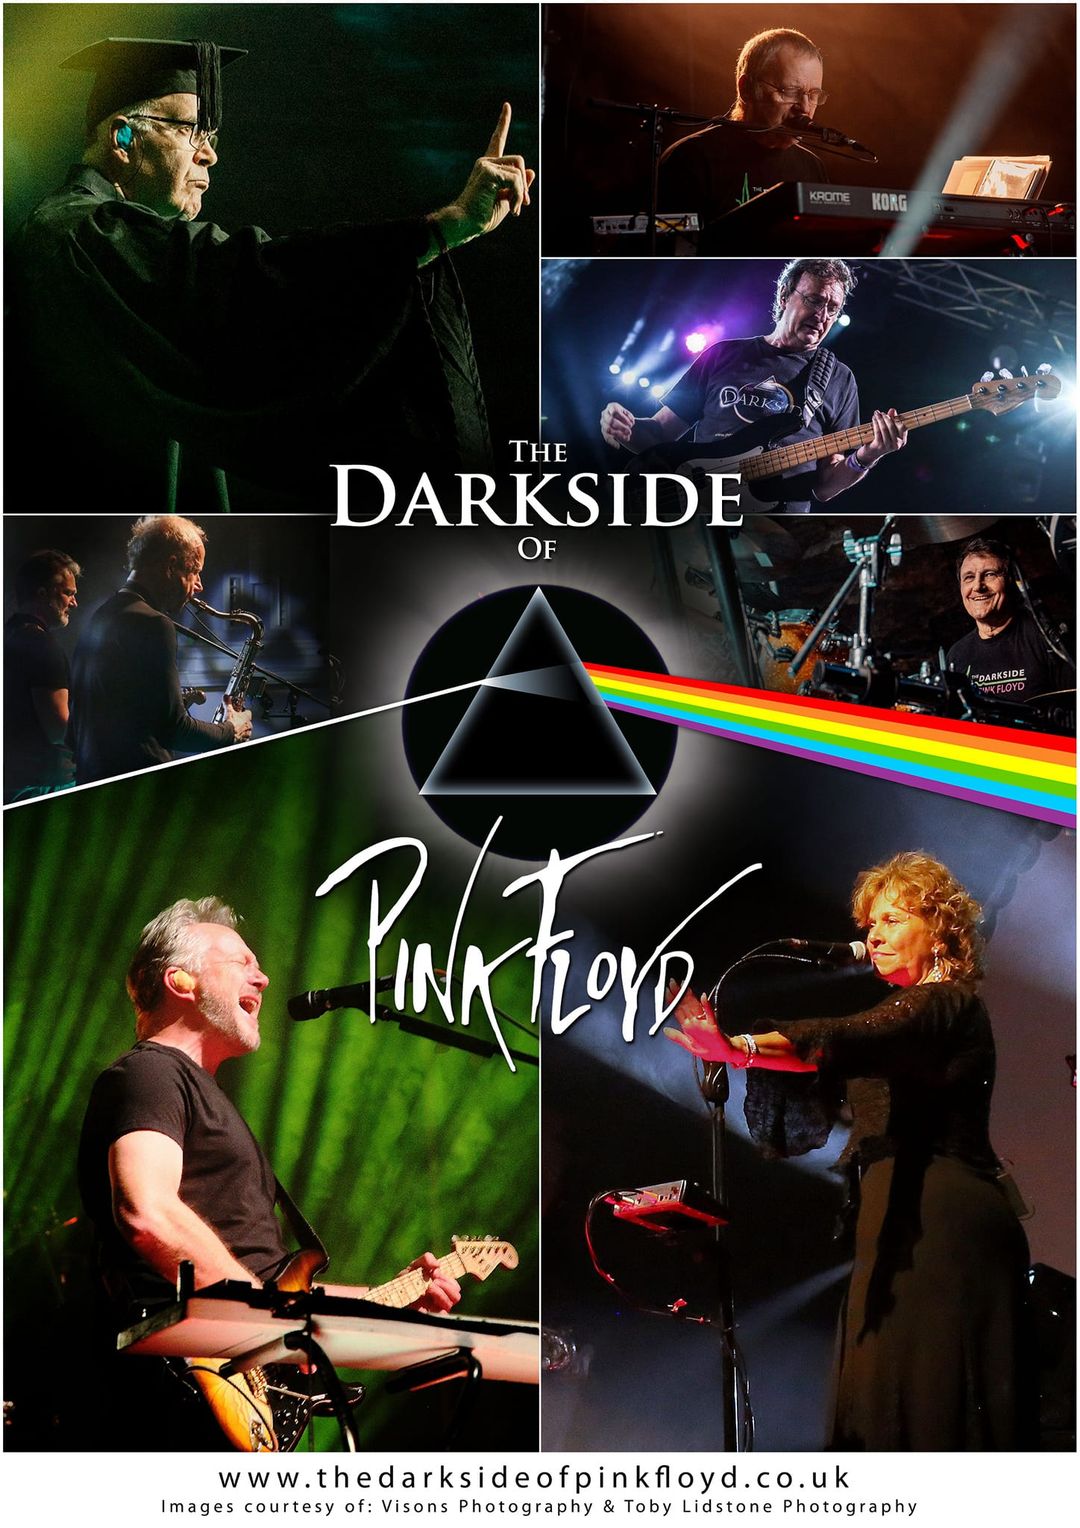 Composite image of the band members